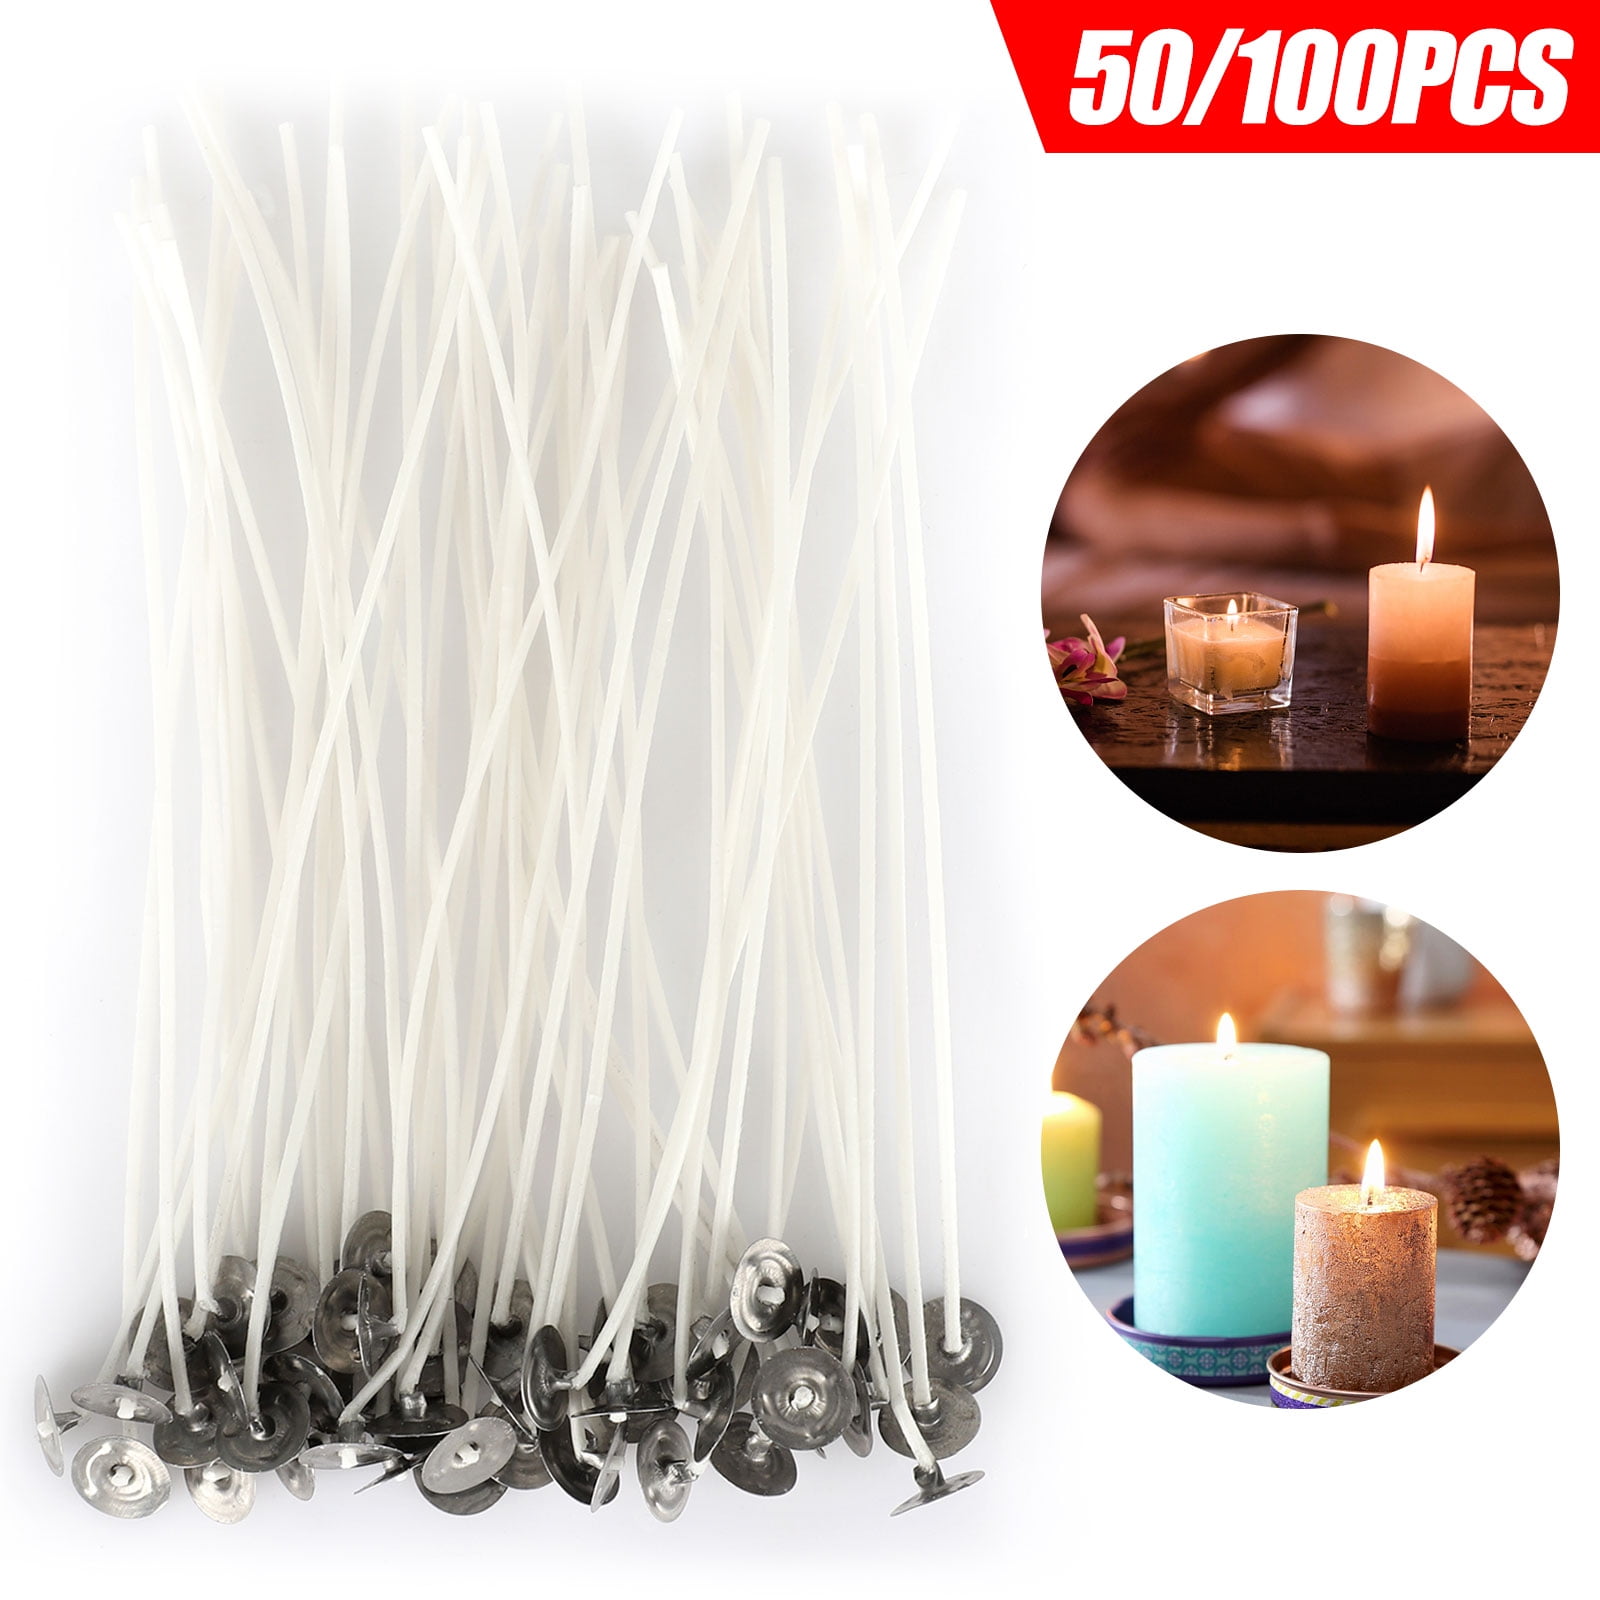 YZNlife Candle Making kit Includes 1pcs Candle Make Pouring Pot,50pcs Candle Wicks,50pcs Candle Wicks Sticker and 2pcs 3-Hole Candle Wicks Holder